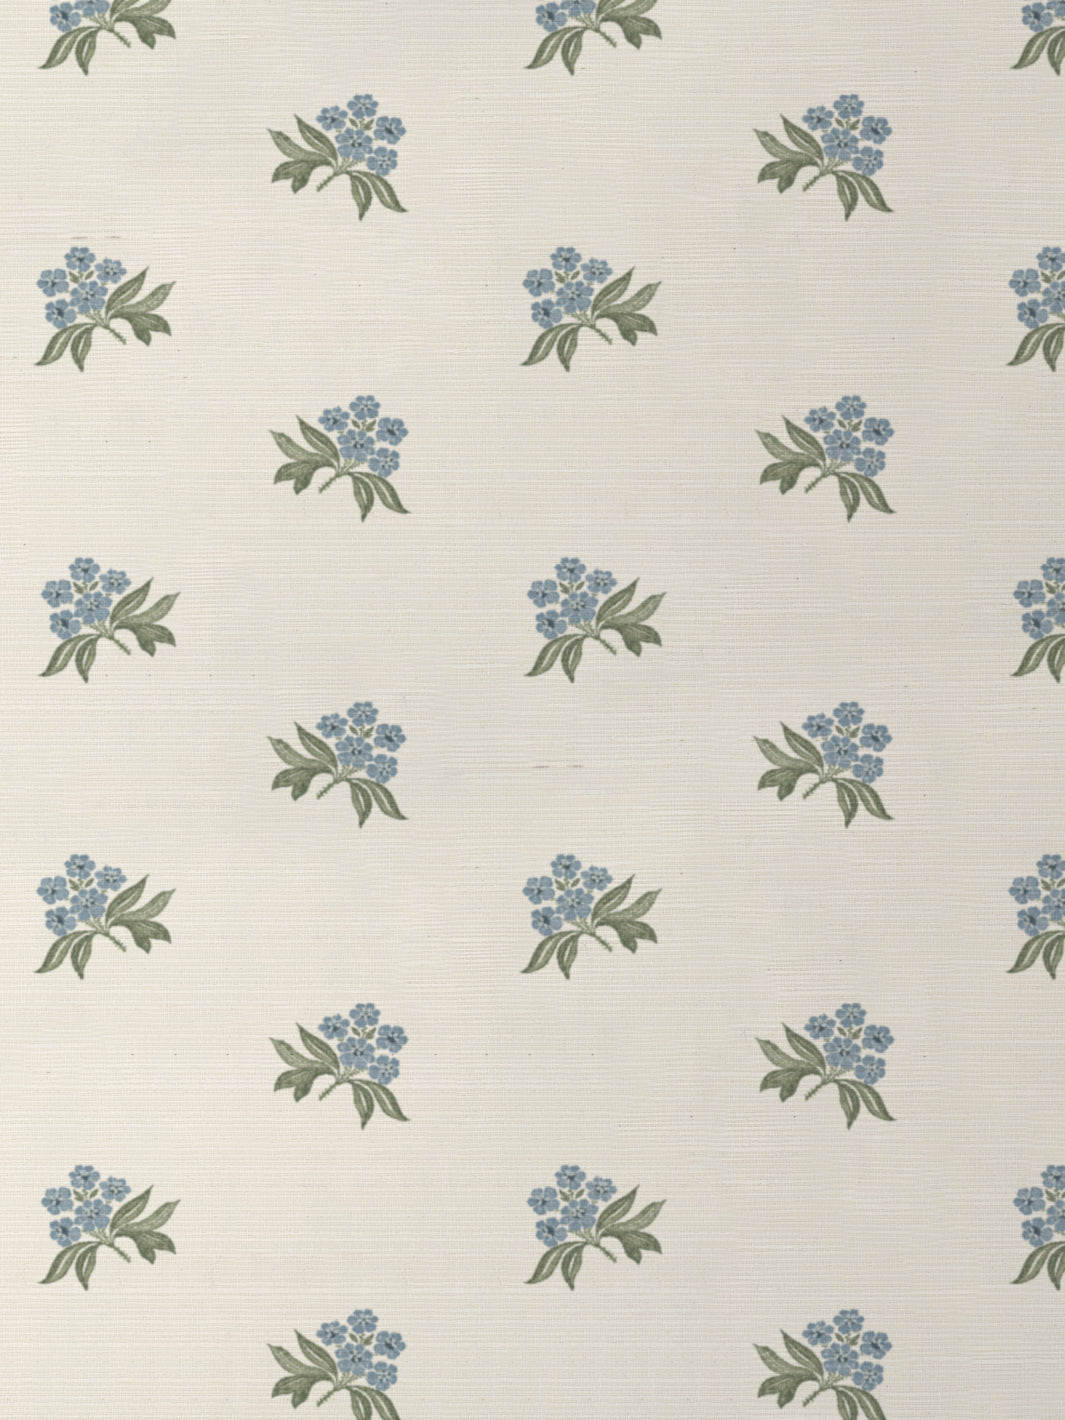 'Marian Ditsy' Grasscloth Wallpaper by Nathan Turner - Blue Green